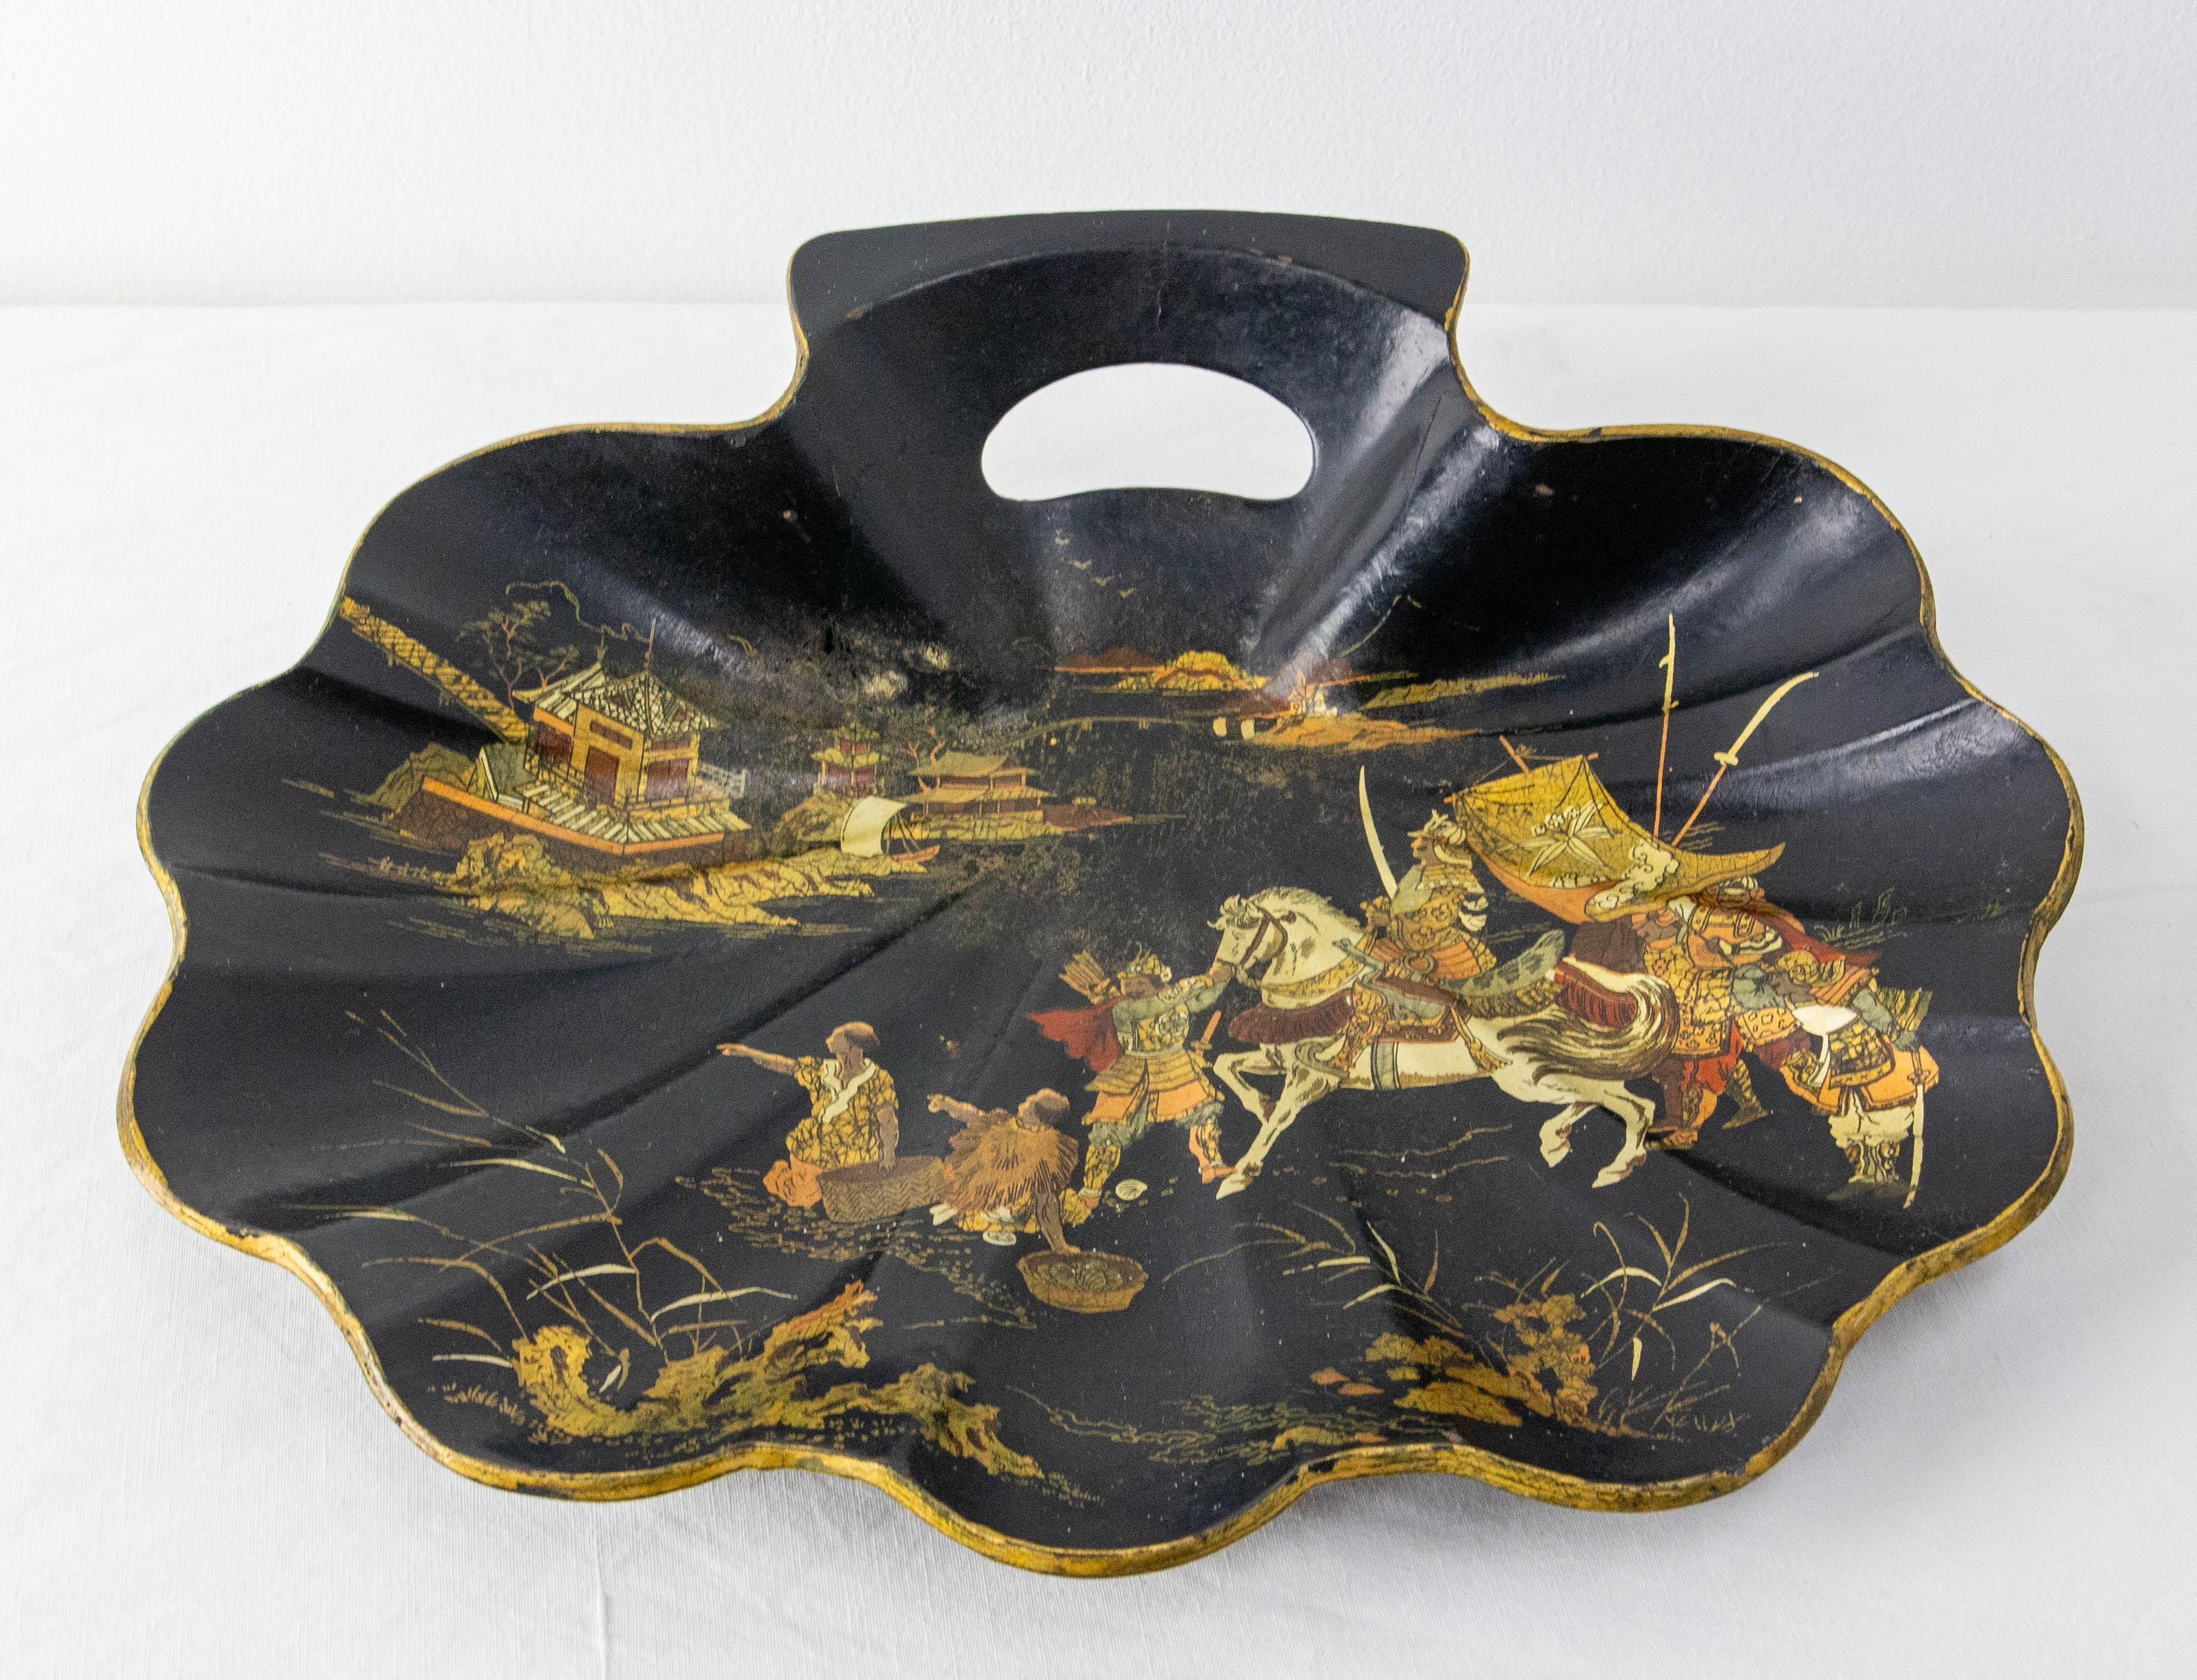 Chinese shell shape decorative little empty pocket papier mache with a handle late 19th century.
Black Lacquered with a 
Classic chinoiserie scene of the period Napoleon III with a painted decoration of a lord on horseback and his crew asking